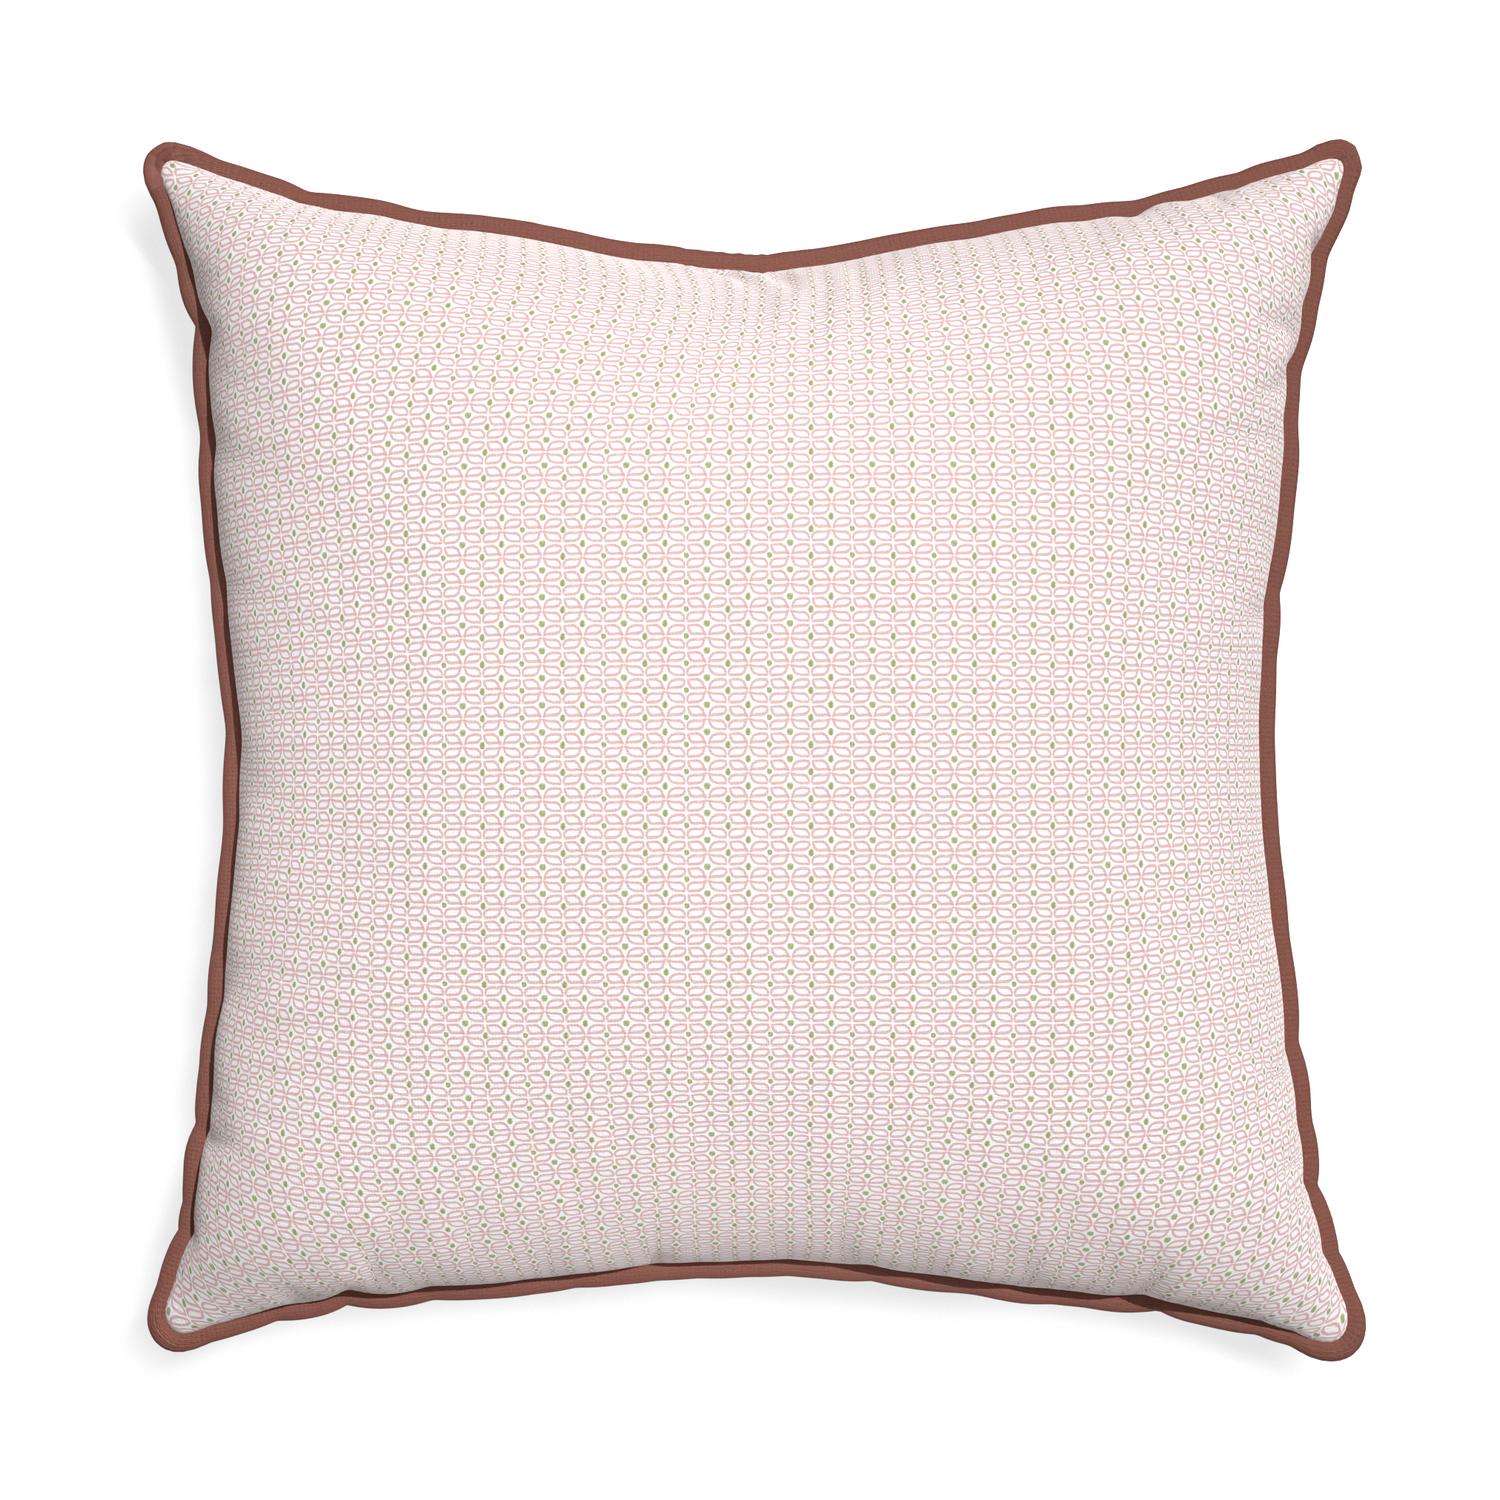 Euro-sham loomi pink custom pink geometricpillow with w piping on white background